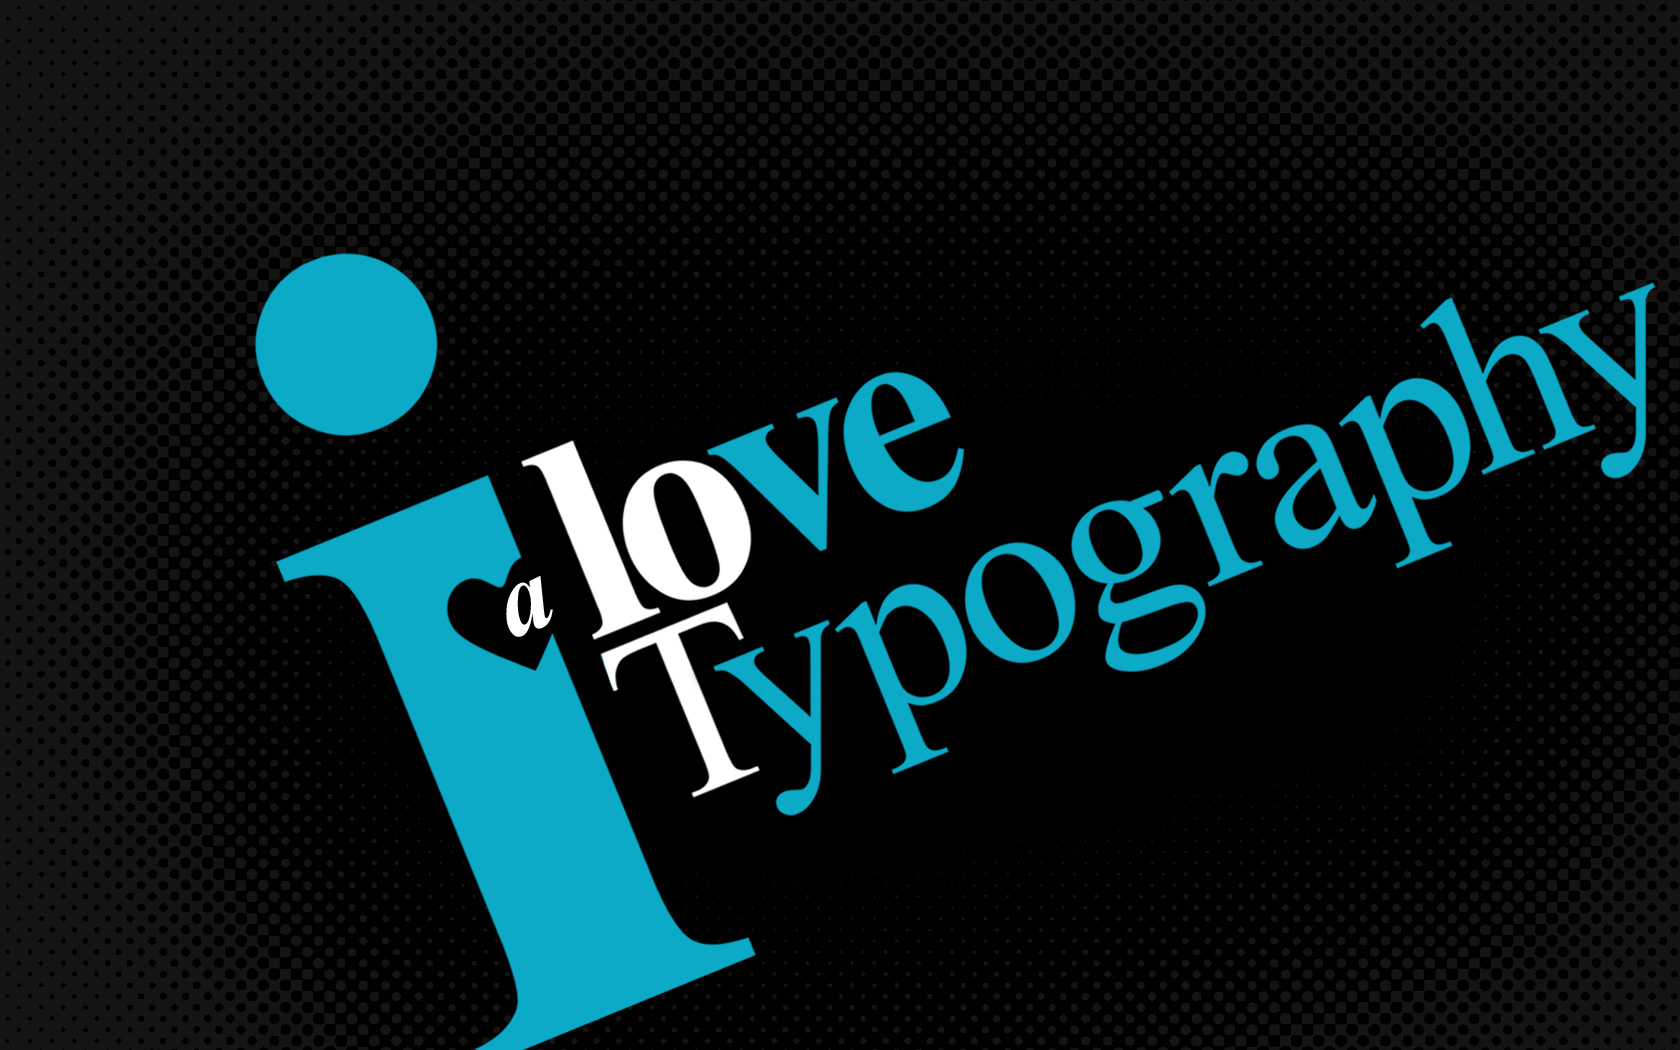 Creative Typography Wallpaper To Spice Up Your Desktop